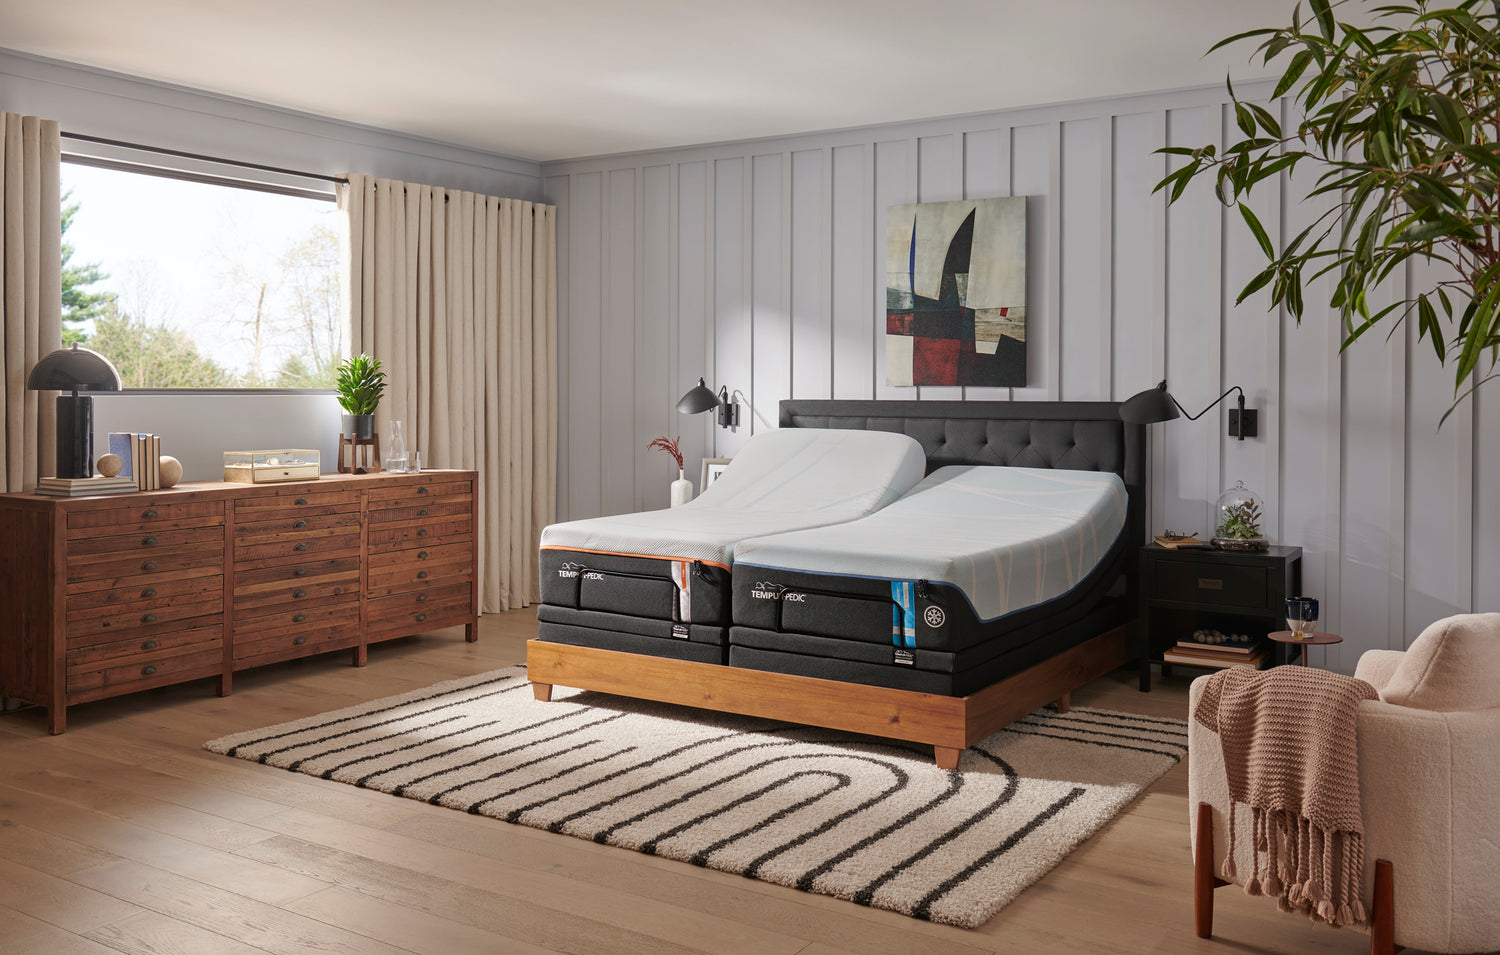 A Tempur-Pedic adjustable base and mattress in a bed room. 